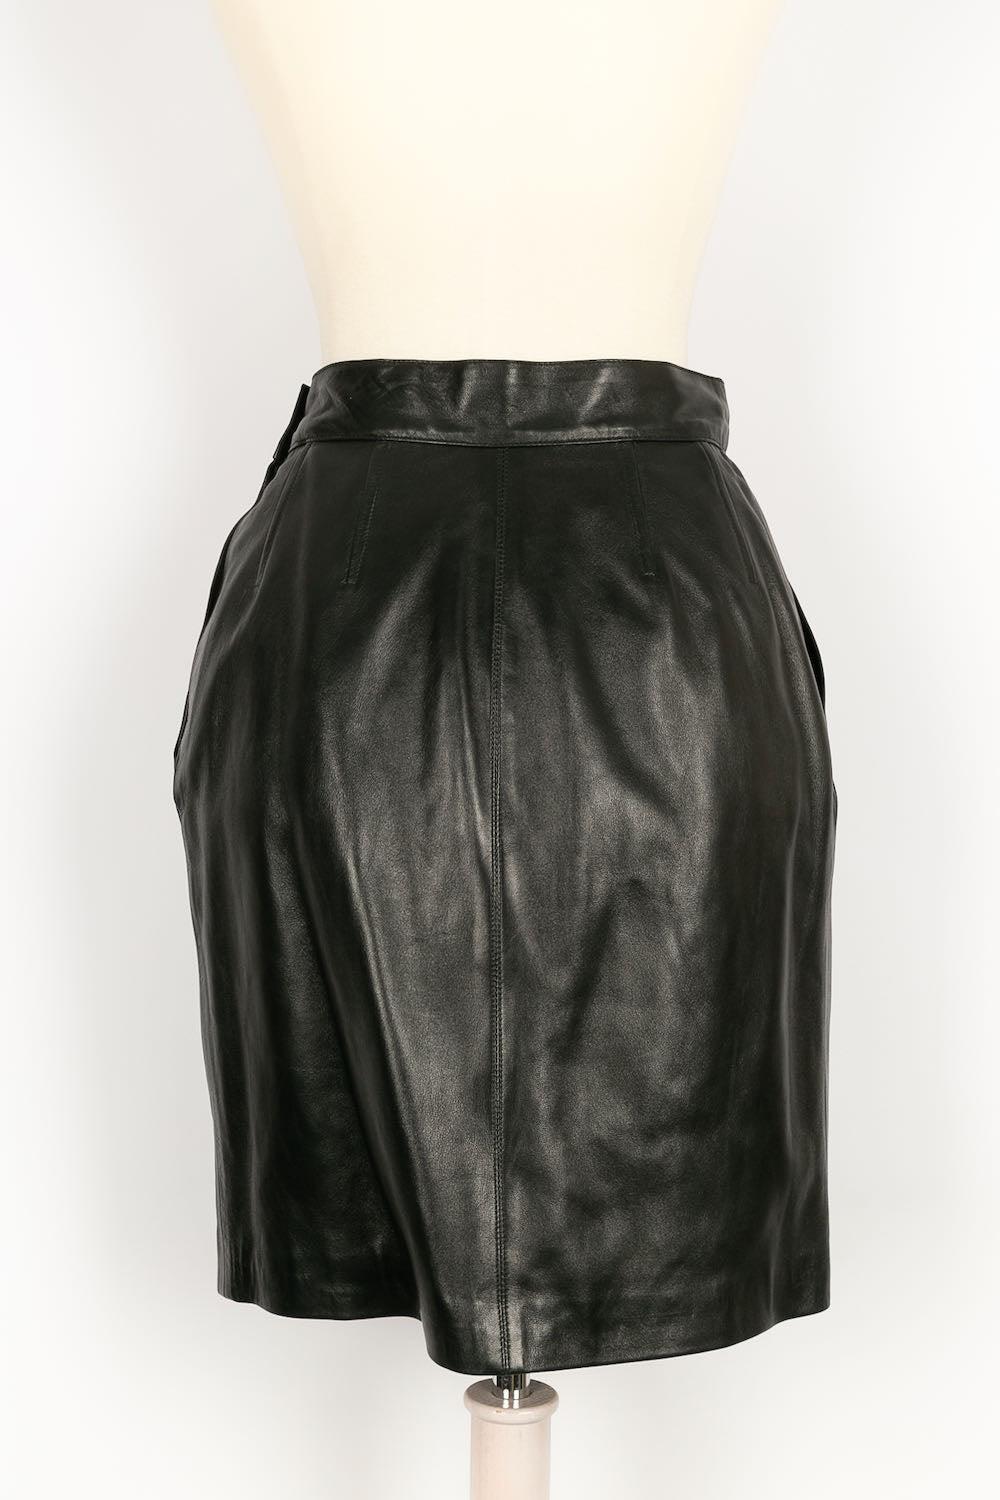 Yves Saint Laurent Leather Suit with Tassels, 1990 For Sale 6